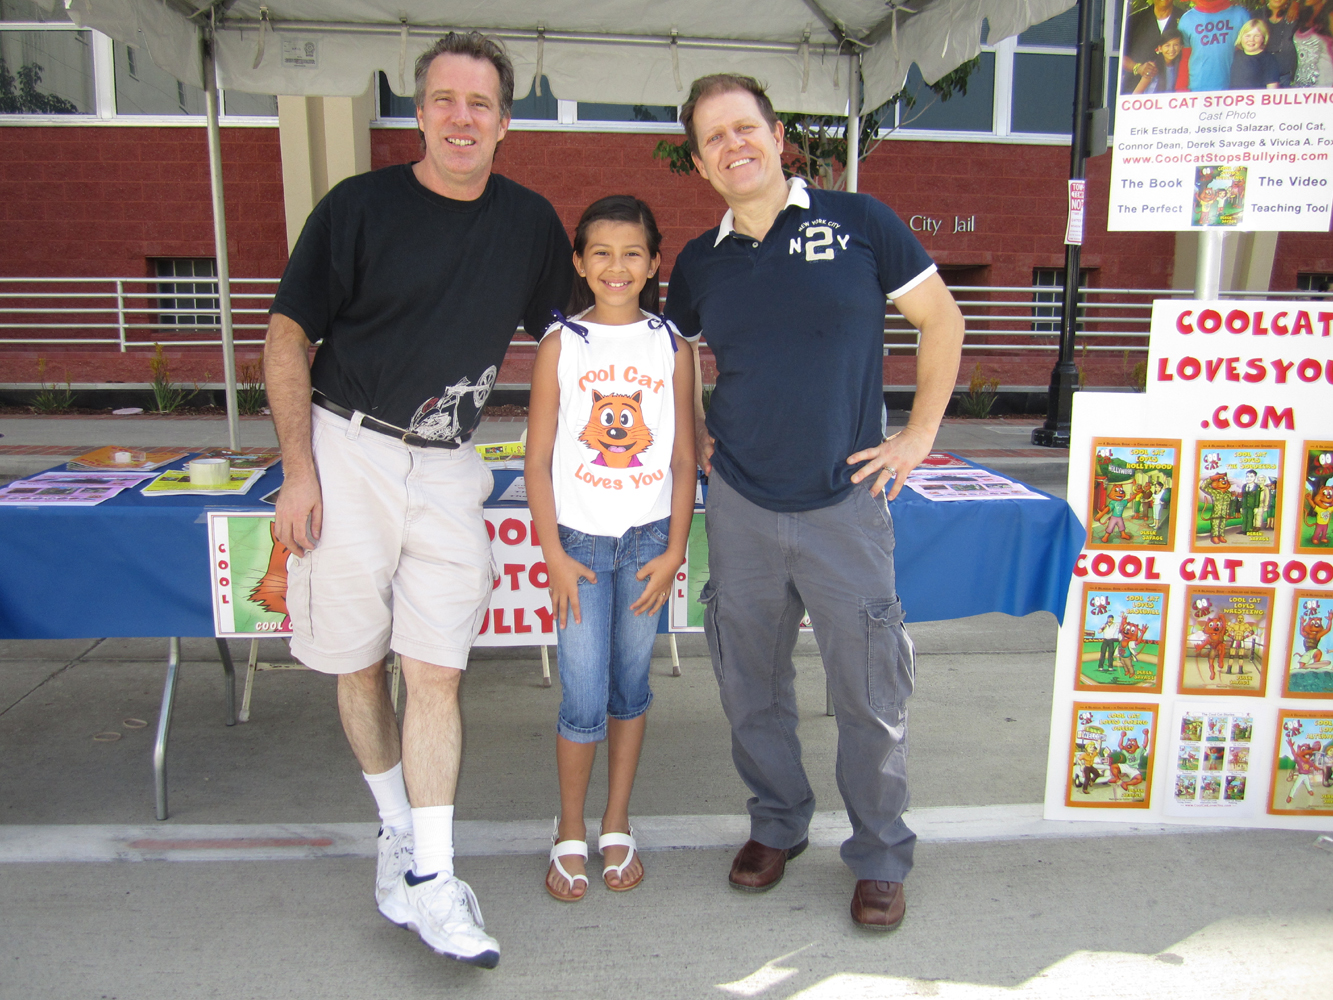 Derek Savage, Jessica Salazar and Paul Dinh-McCrillis CSA, at the 2012 Burbank Police and Fire Safety Day